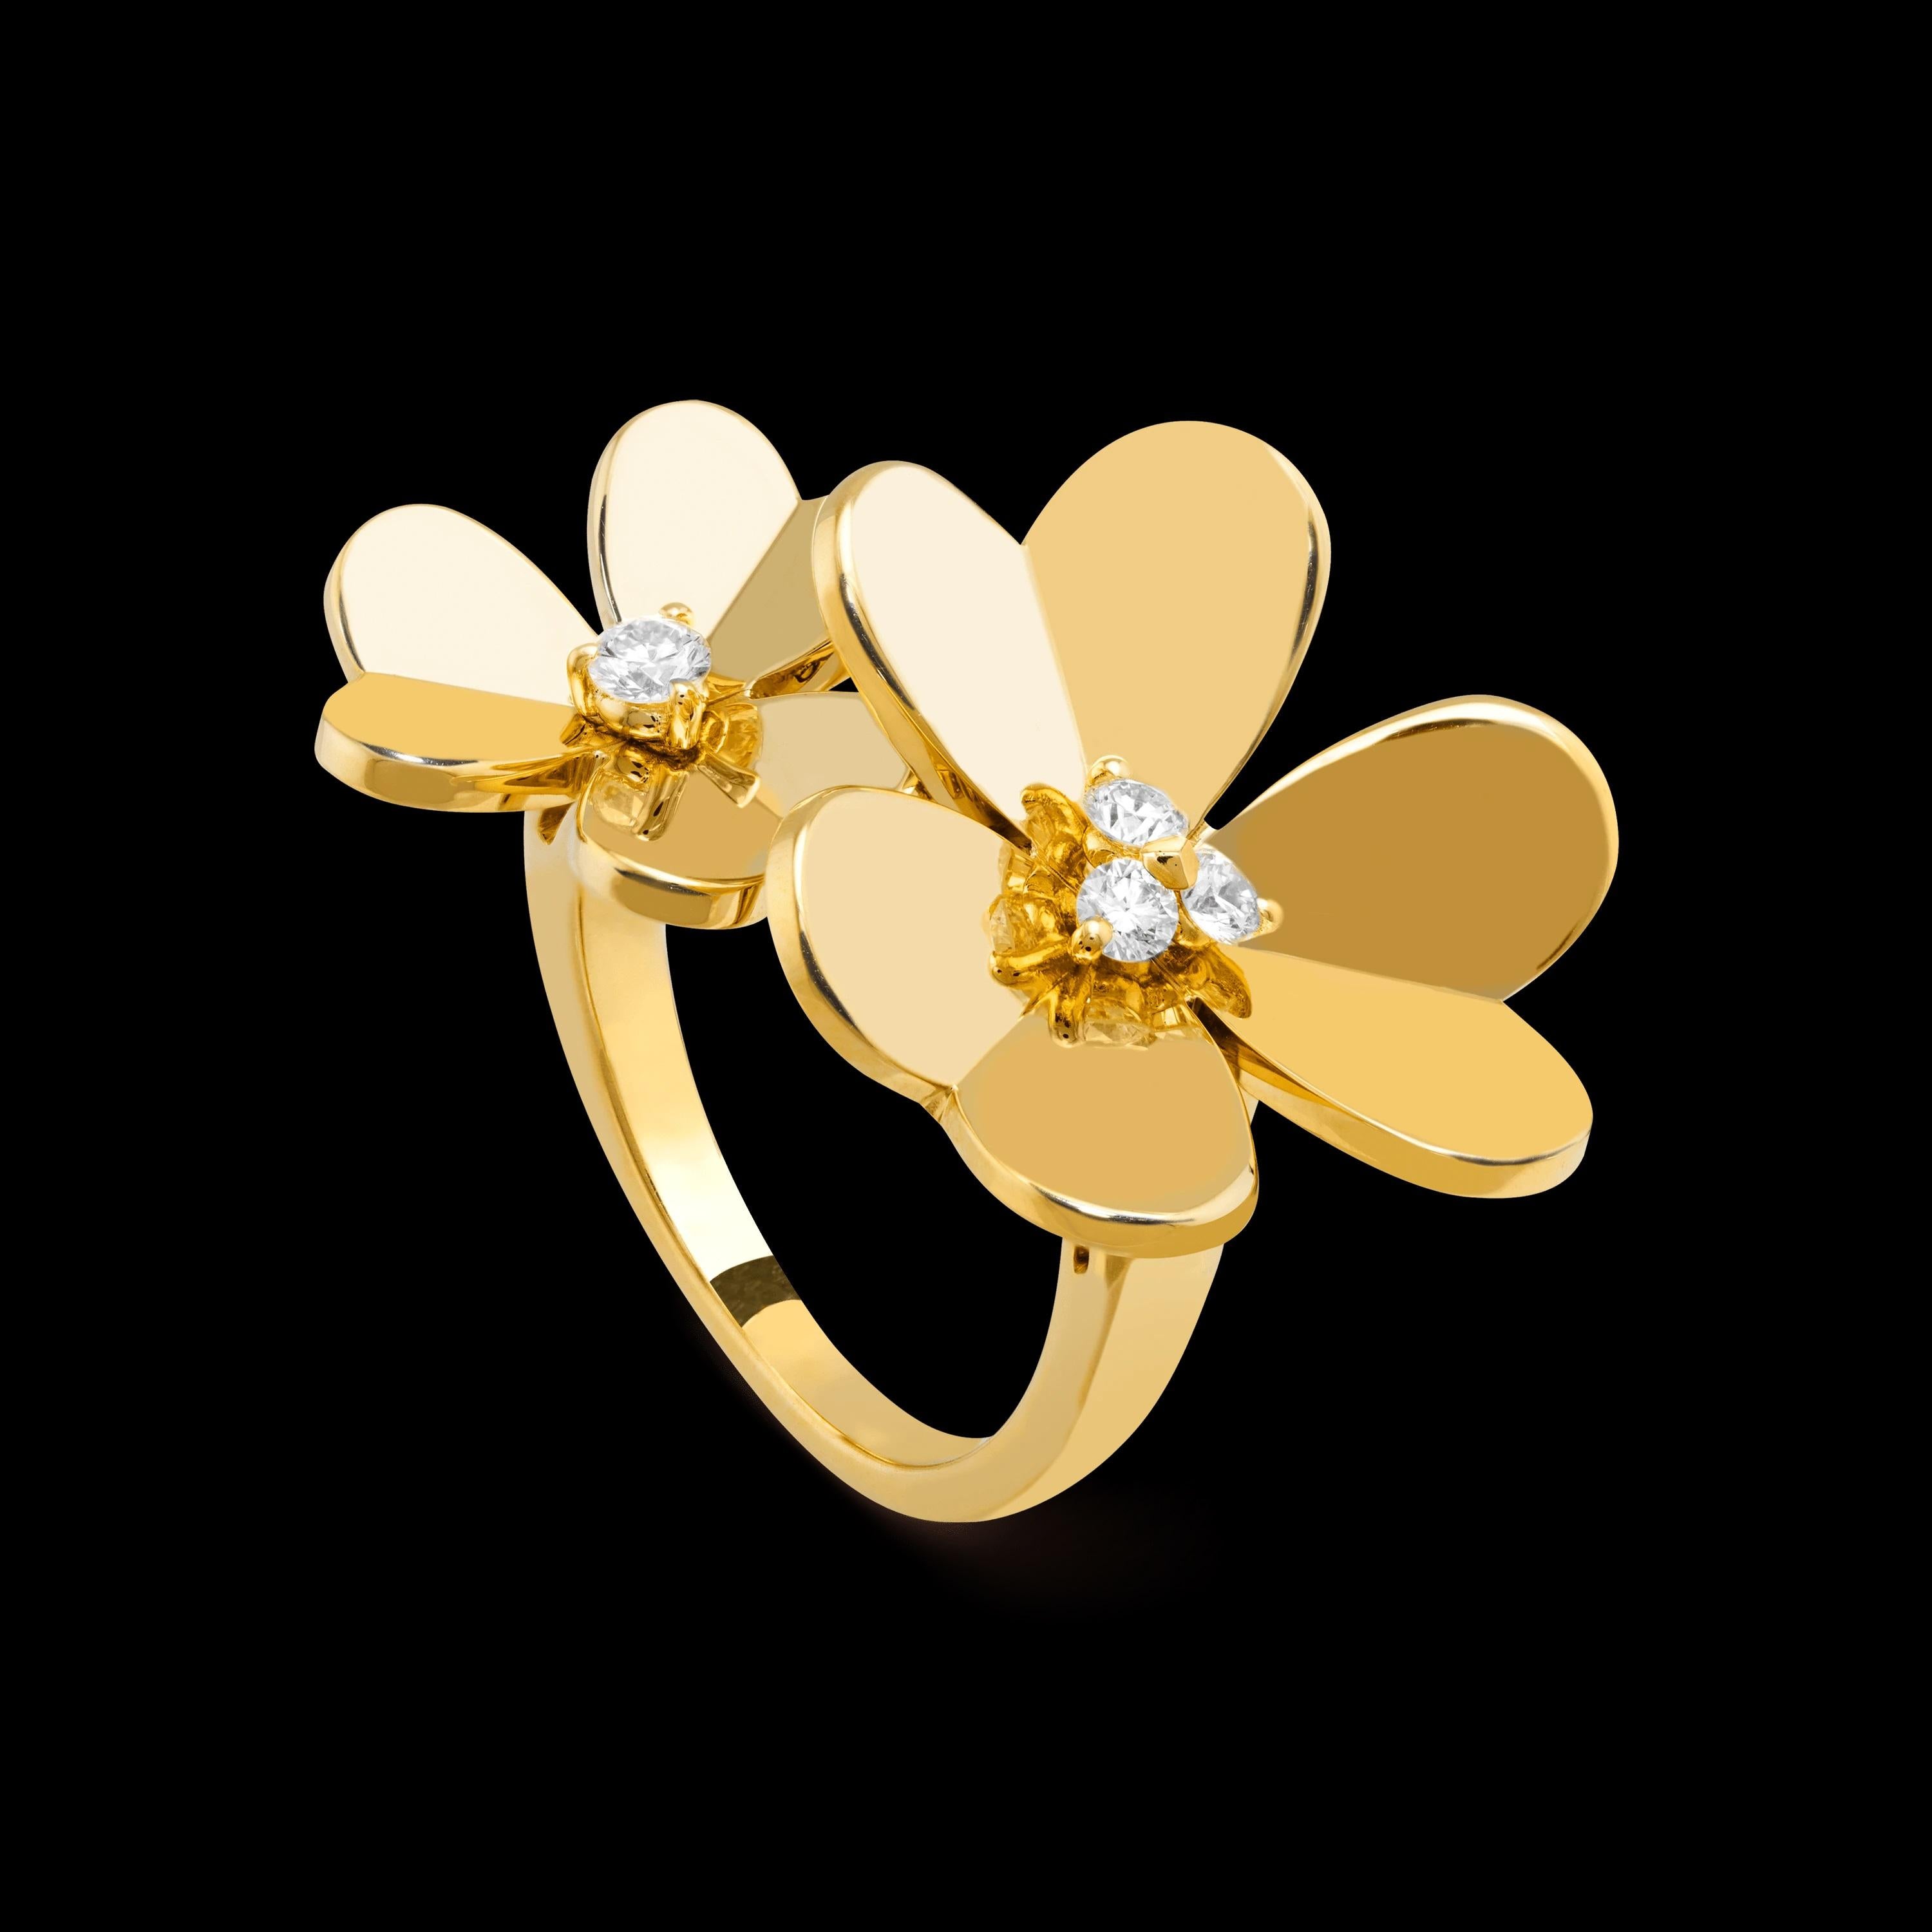 Van Cleef & Arpels Frivole Between Statement Ring in 18k yellow gold 
Retail price: $6650
Our Price: $4982
Size – 54 (7 US)
Excellent condition polished and serviced to have a pristine second life 
Comes with original case serial number  and